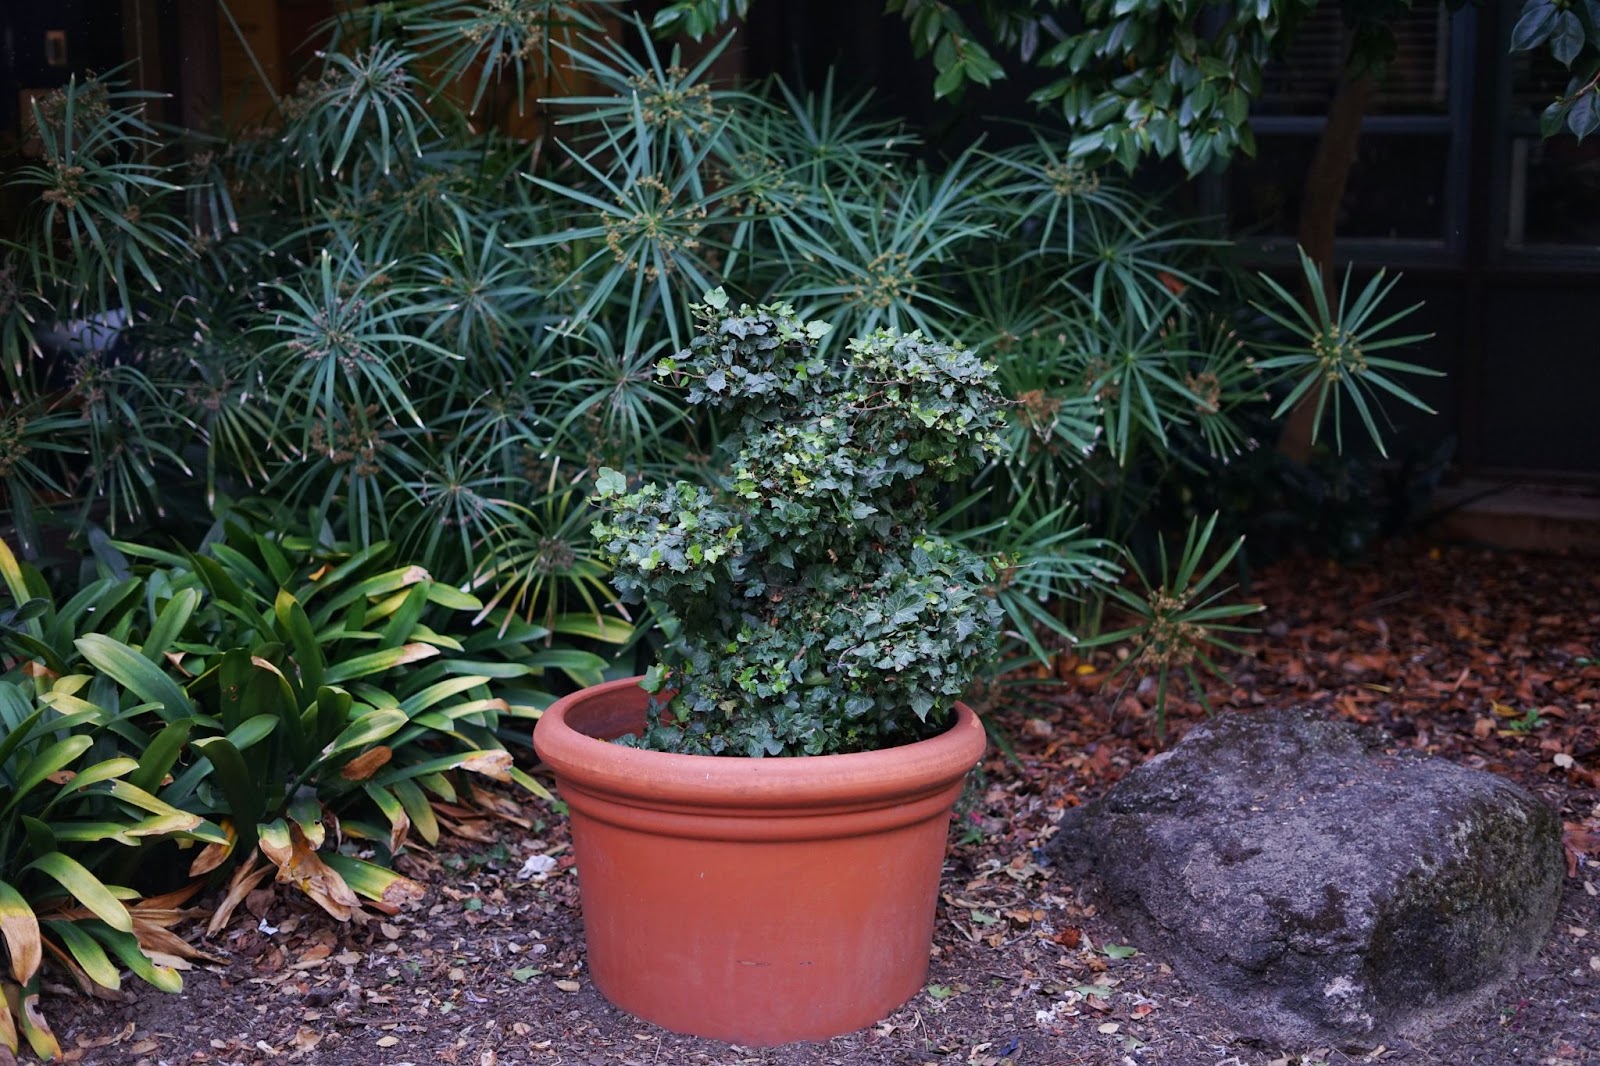 A small plant or shrub shaped in the form of a bear.